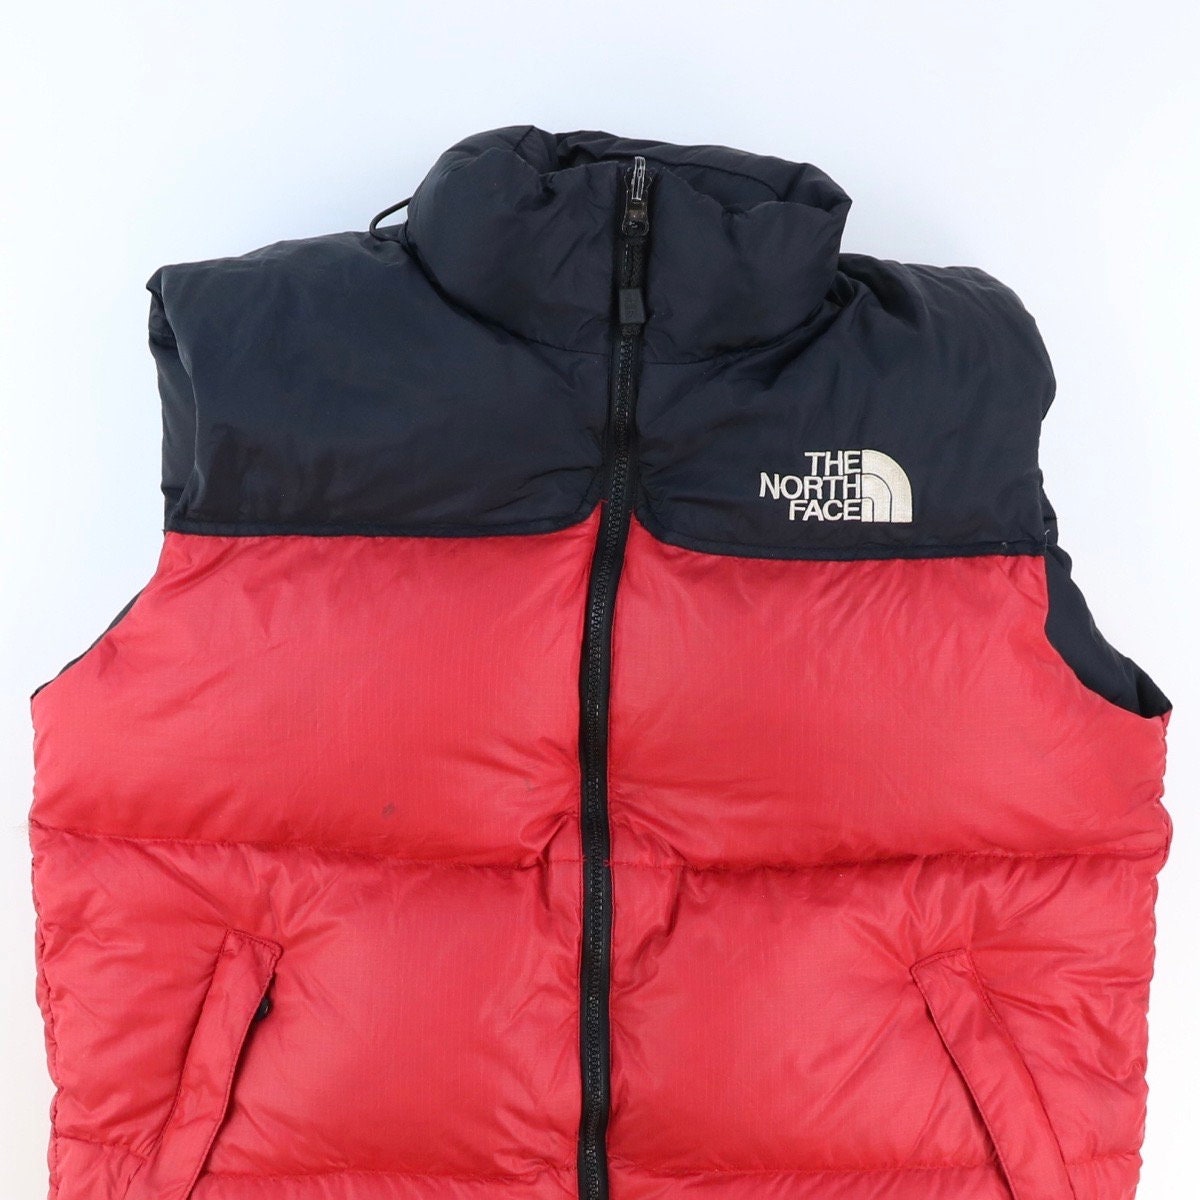 The North Face Puffer Vest Warm 700 Black Size - Etsy